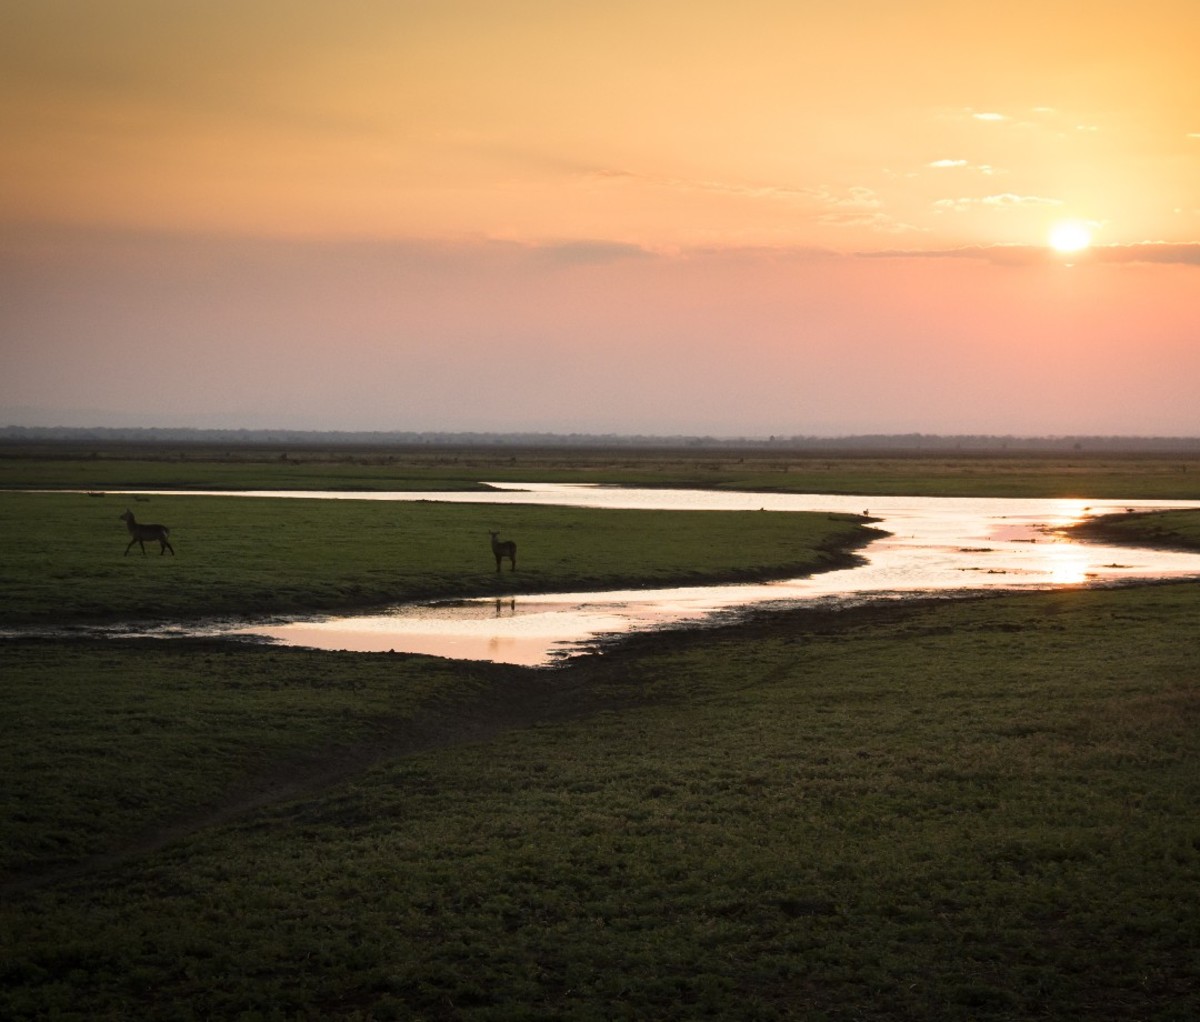 Sunset over the National Park Gorongosa in the center of Mozambique.